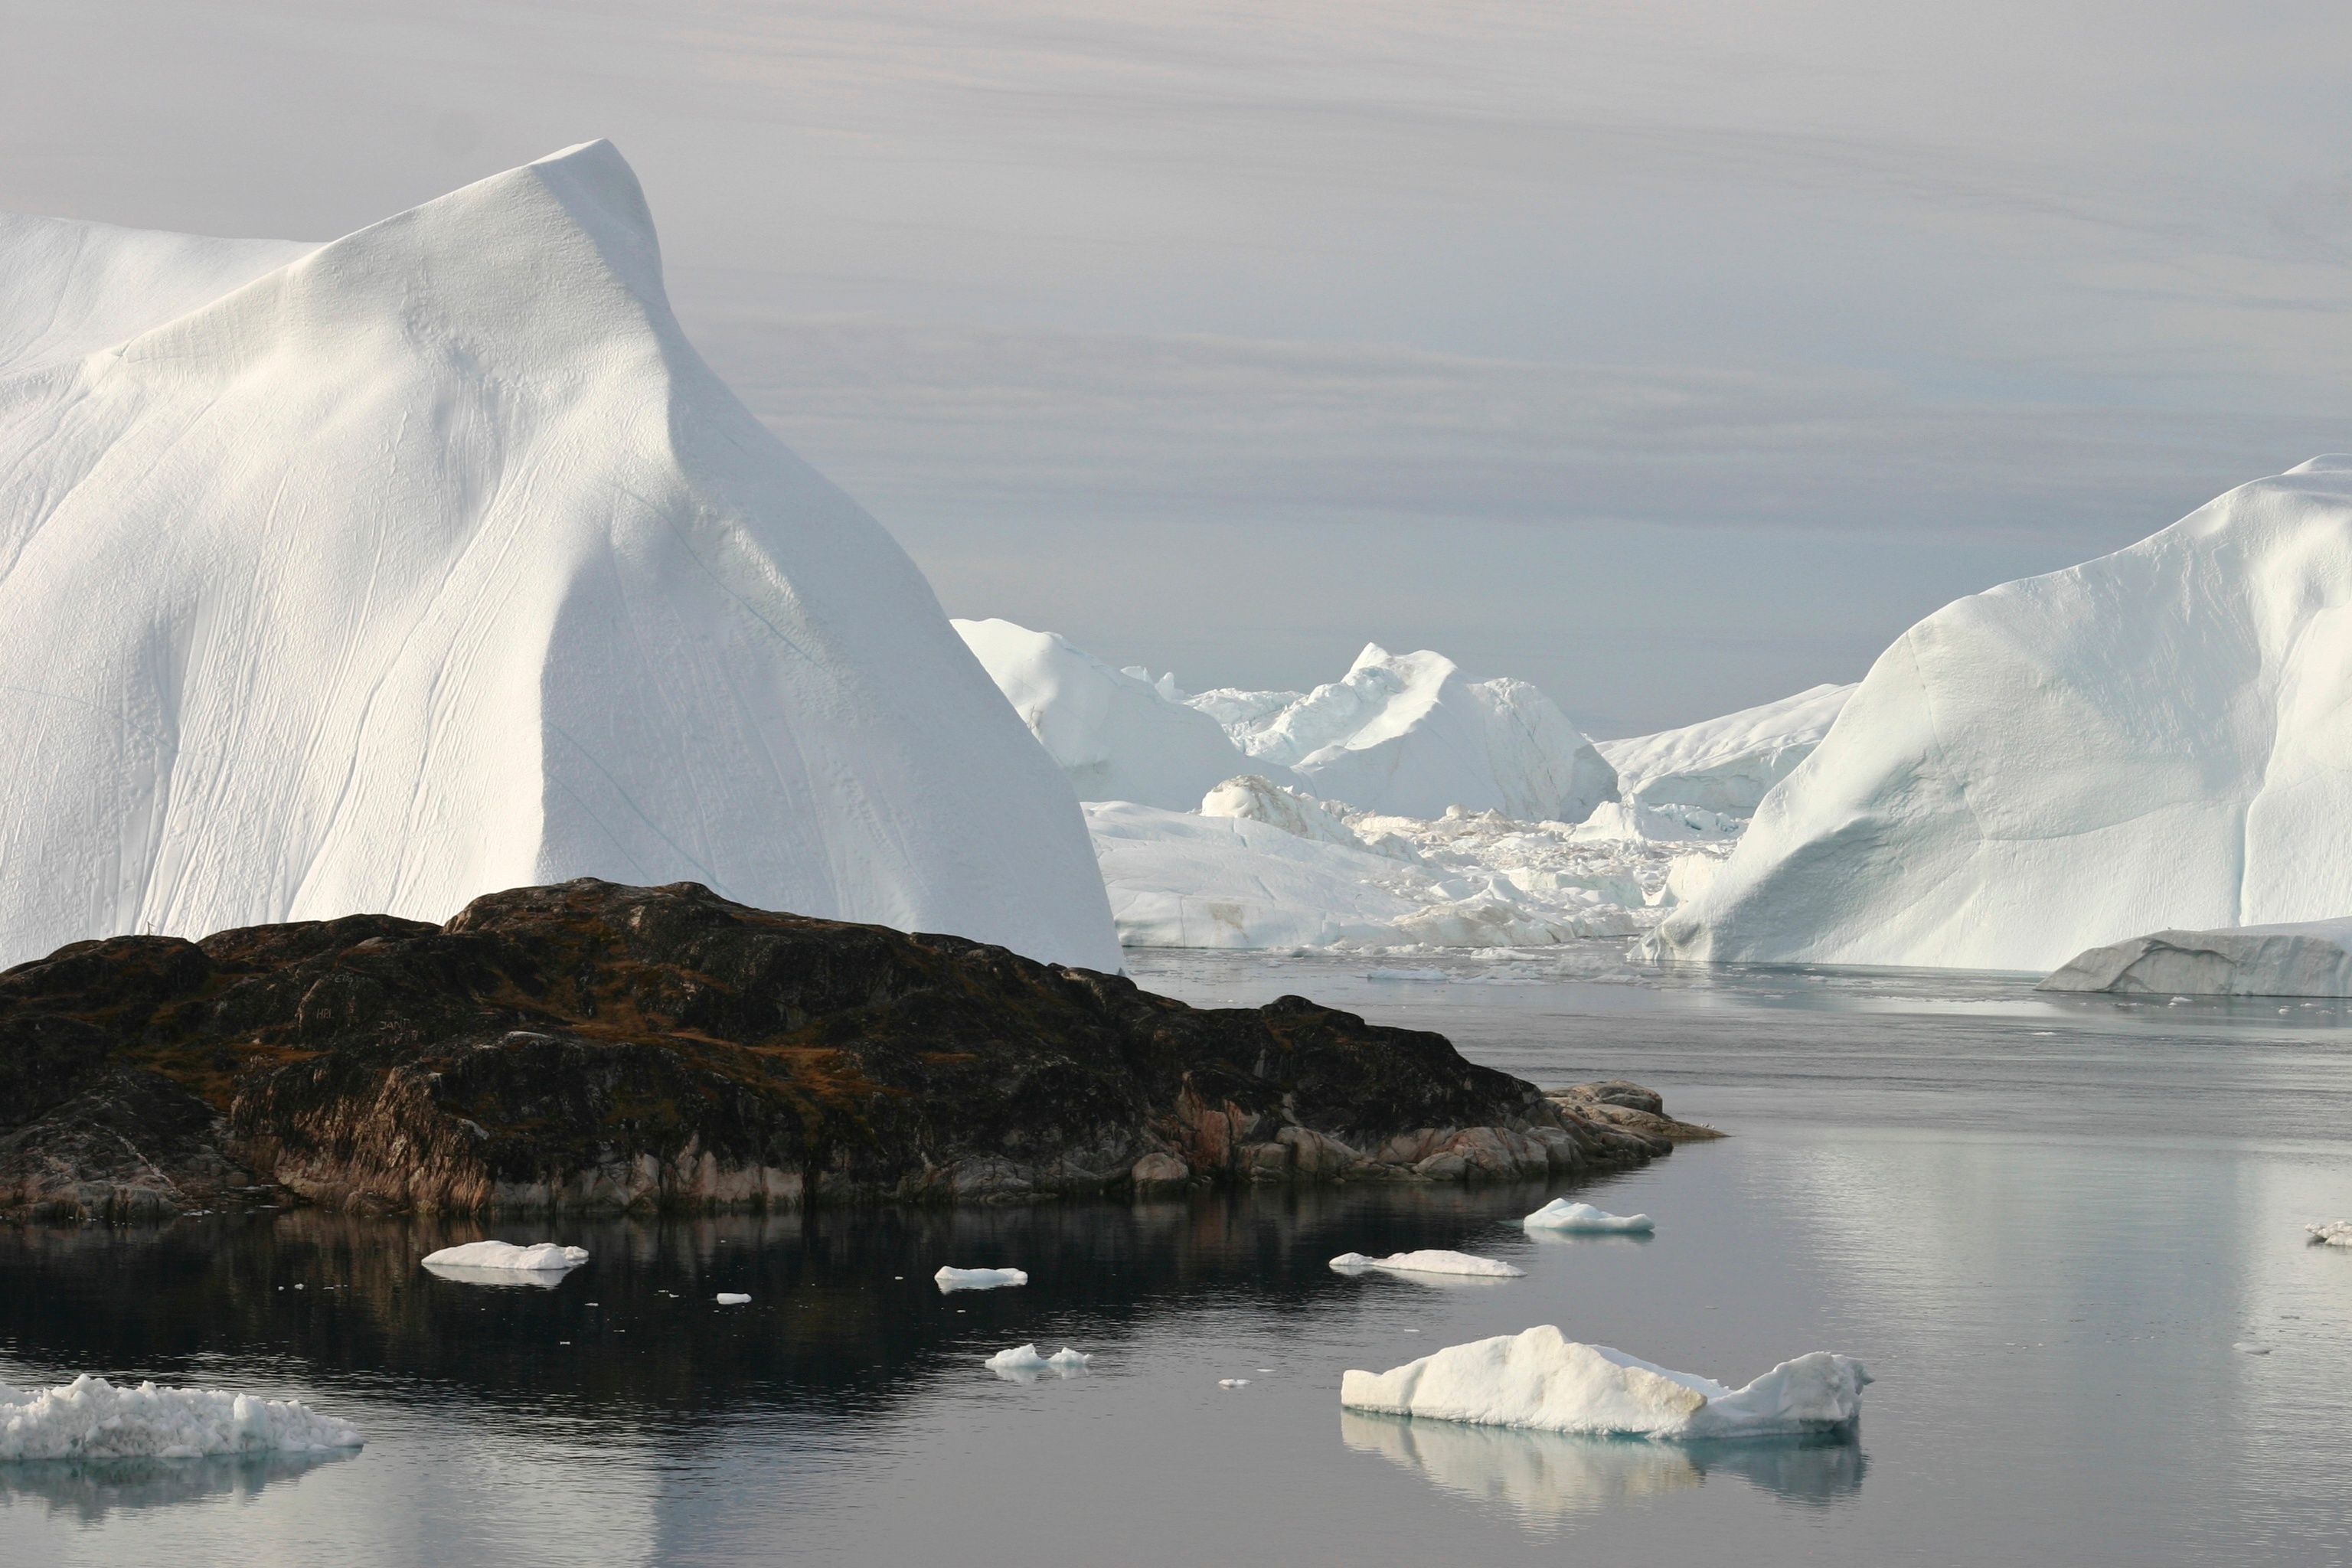 Greenland&apos;s wind, salt water and weather combine to shape the ice into fantastic sculptures.